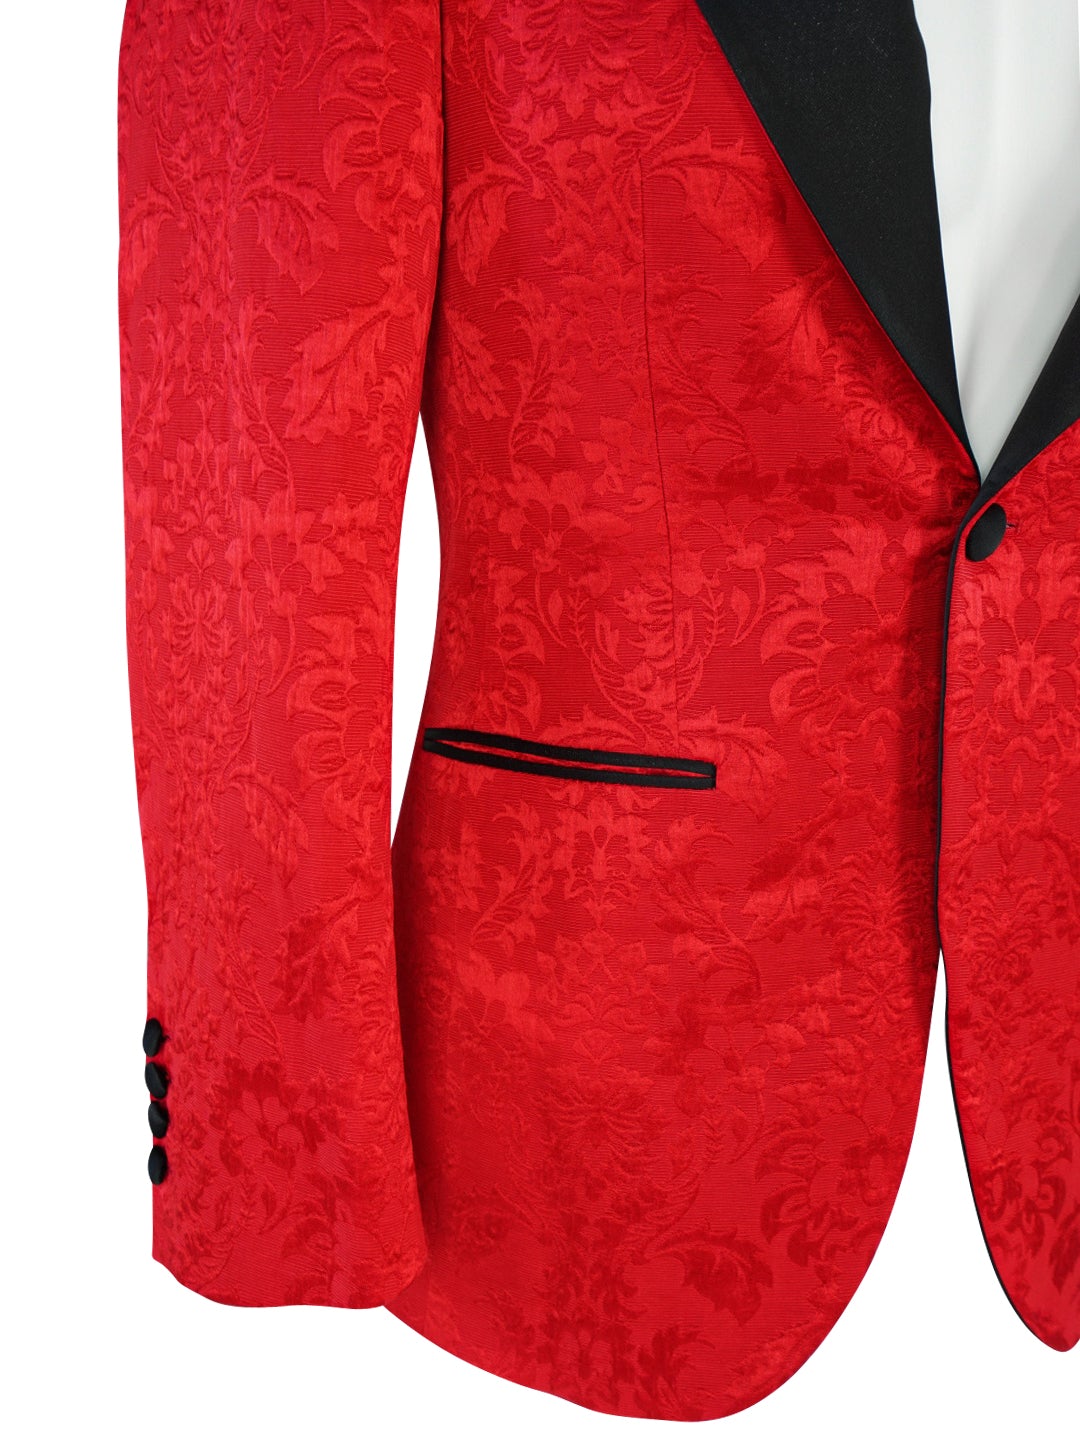 Red & Black Fiore Jacket